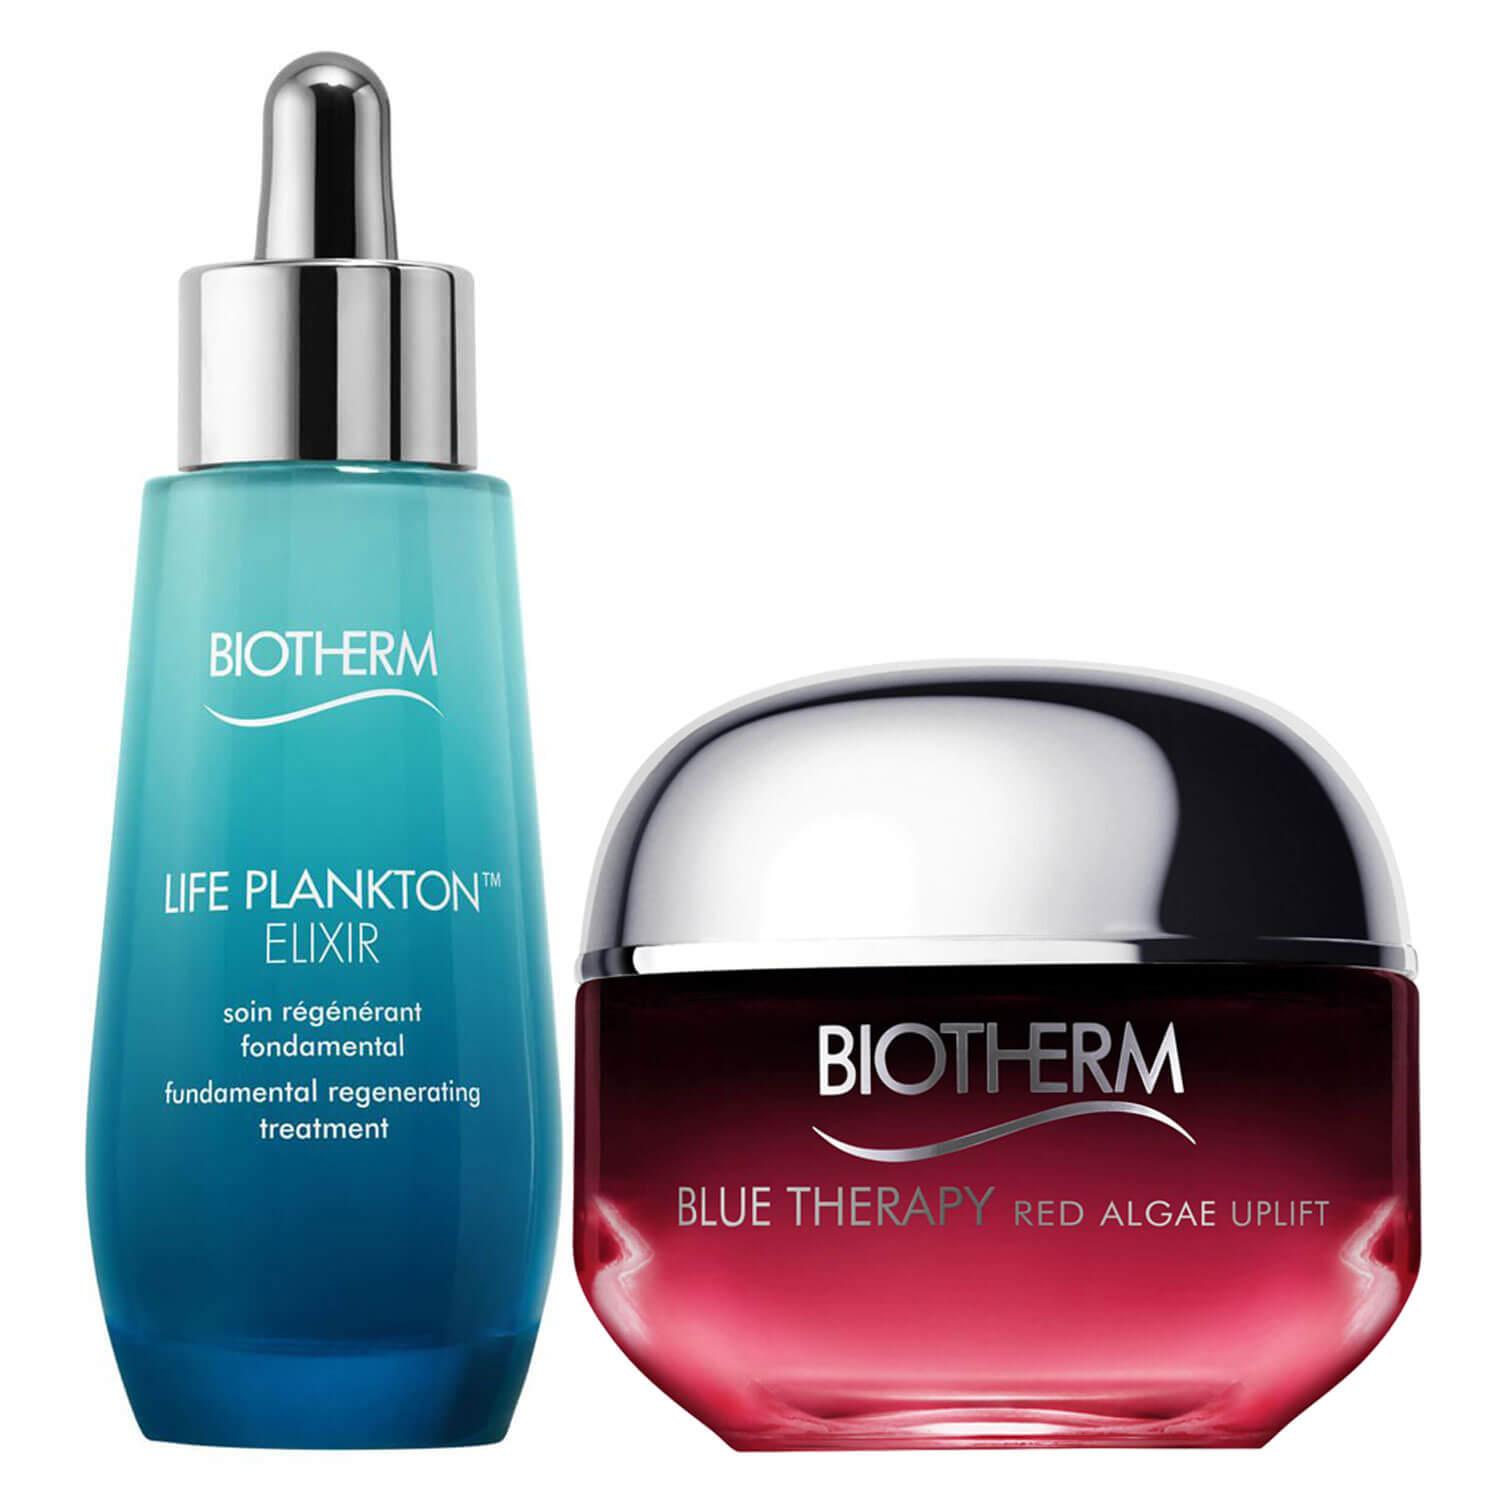 Biotherm Specials - Life Plankton Elixir & Blue Therapy Red Algae Uplift